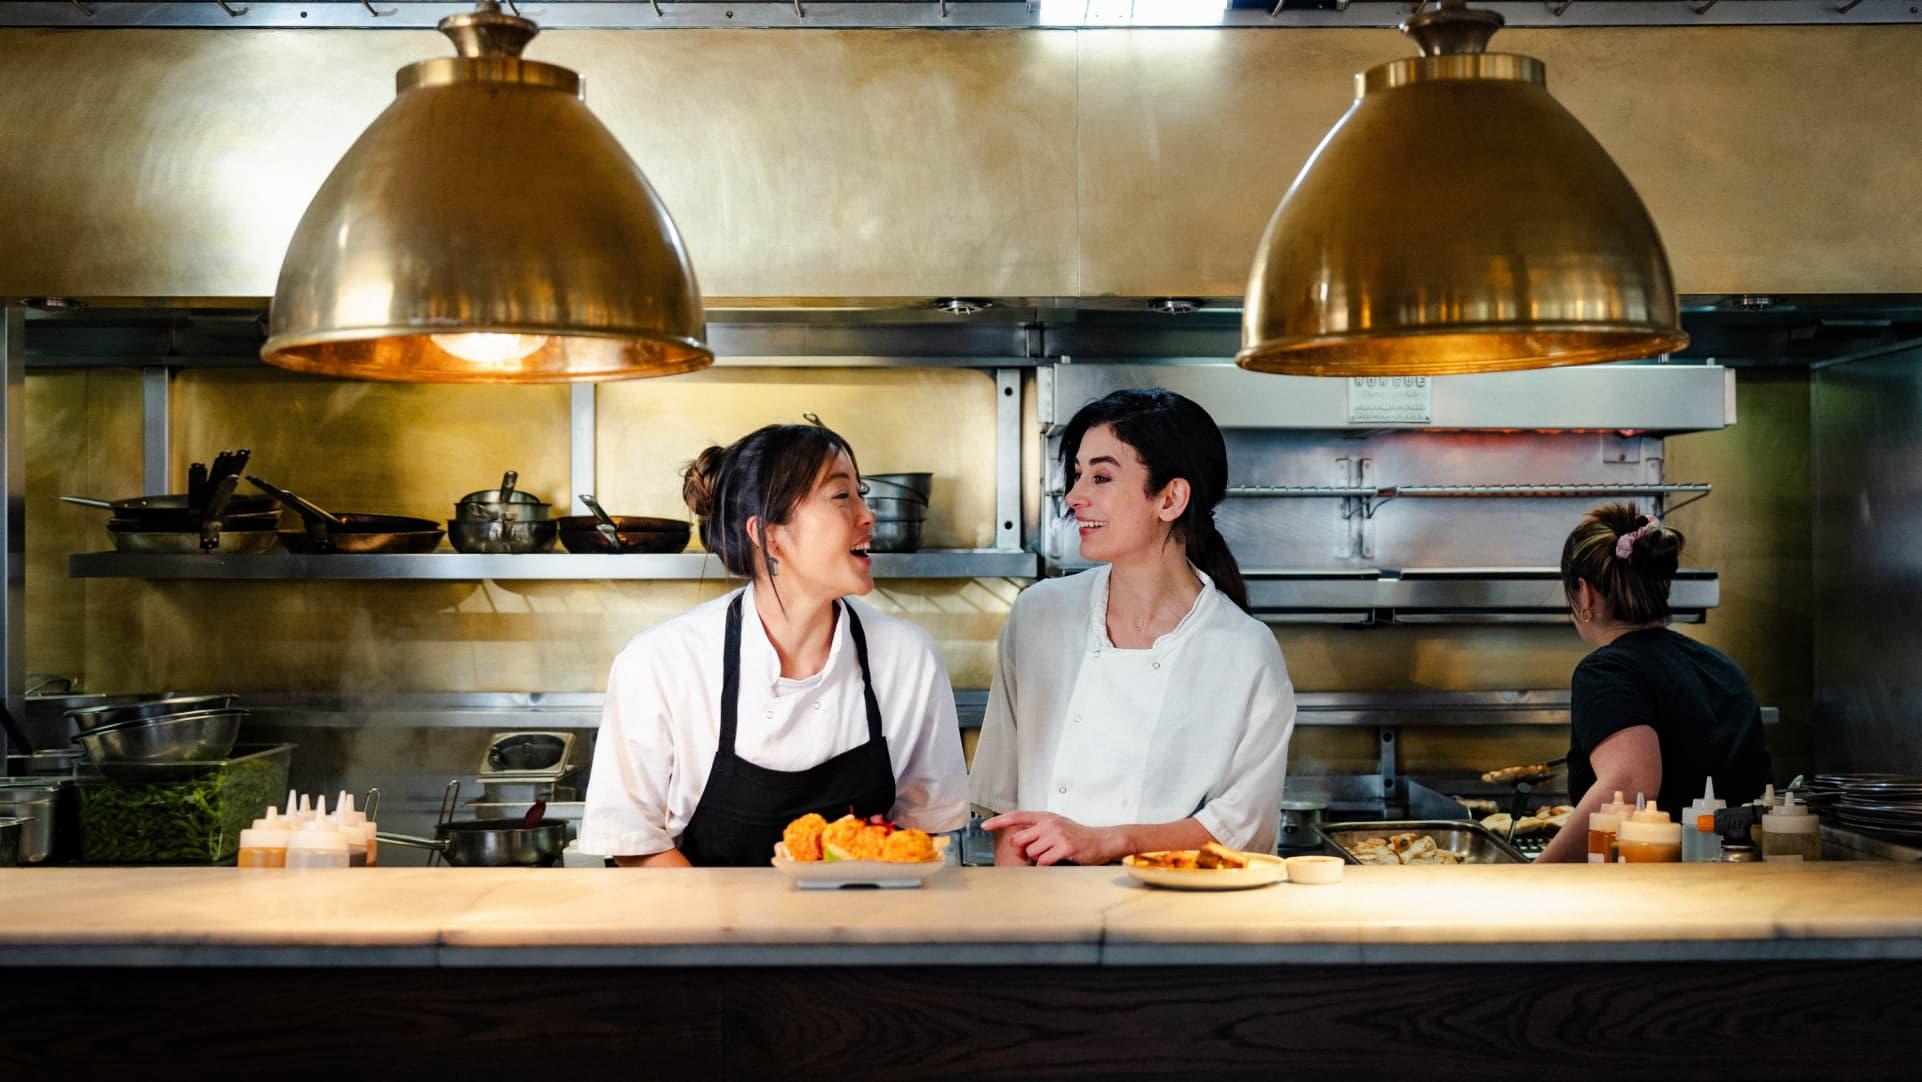 Image of two female chefs looking at one another laughing in the Shoreditch House kitchen. There are two large brass lights hanging from the ceiling. In front of them, there are two plated dishes ready to be served.